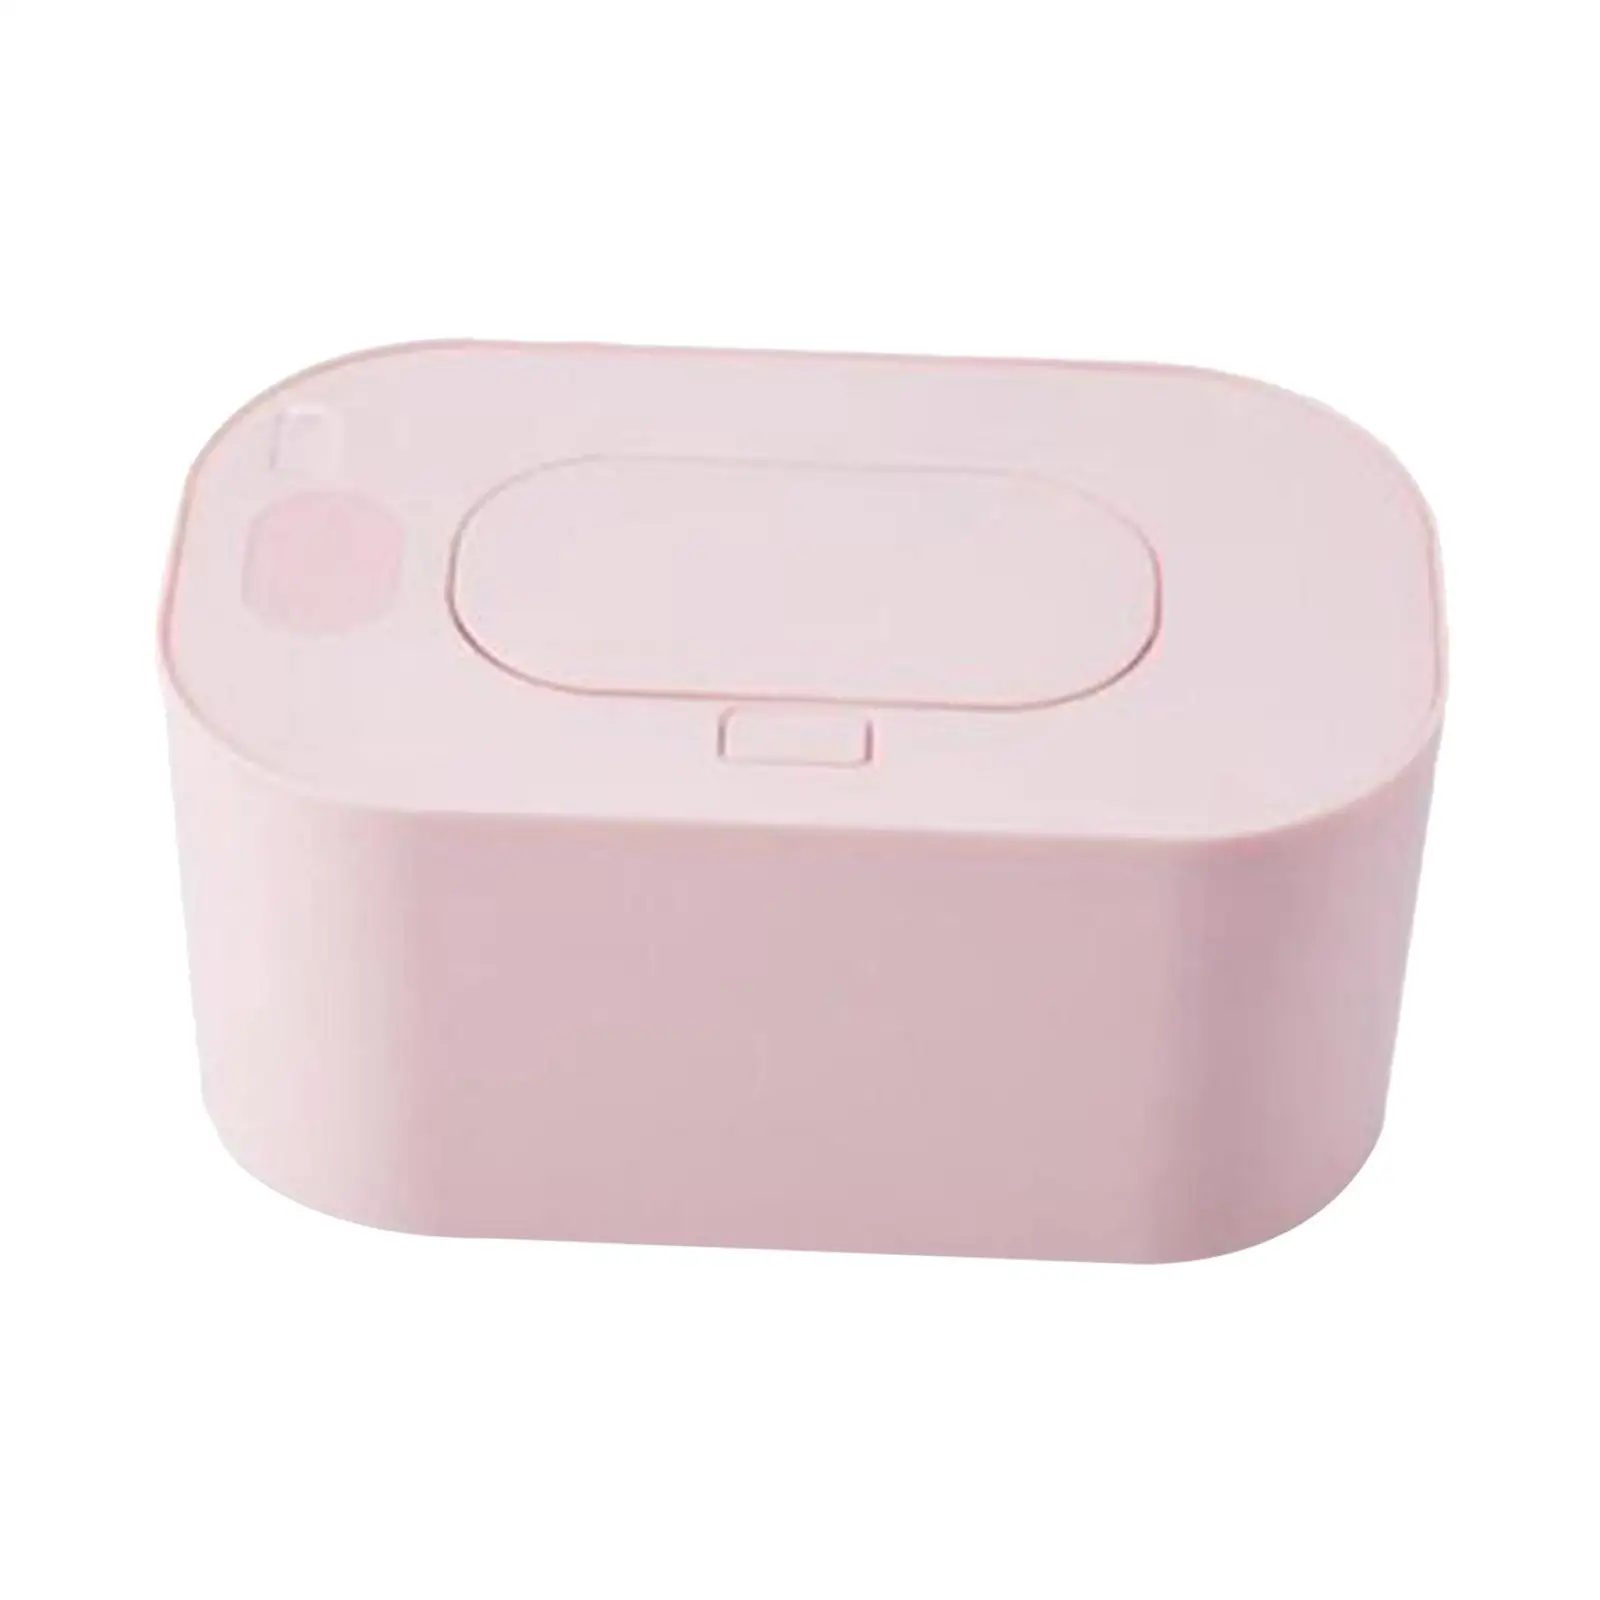 Large Capacity Wipe Holder Wipe Heating Device Wipe Container Wet Wipe Holder Case for Home